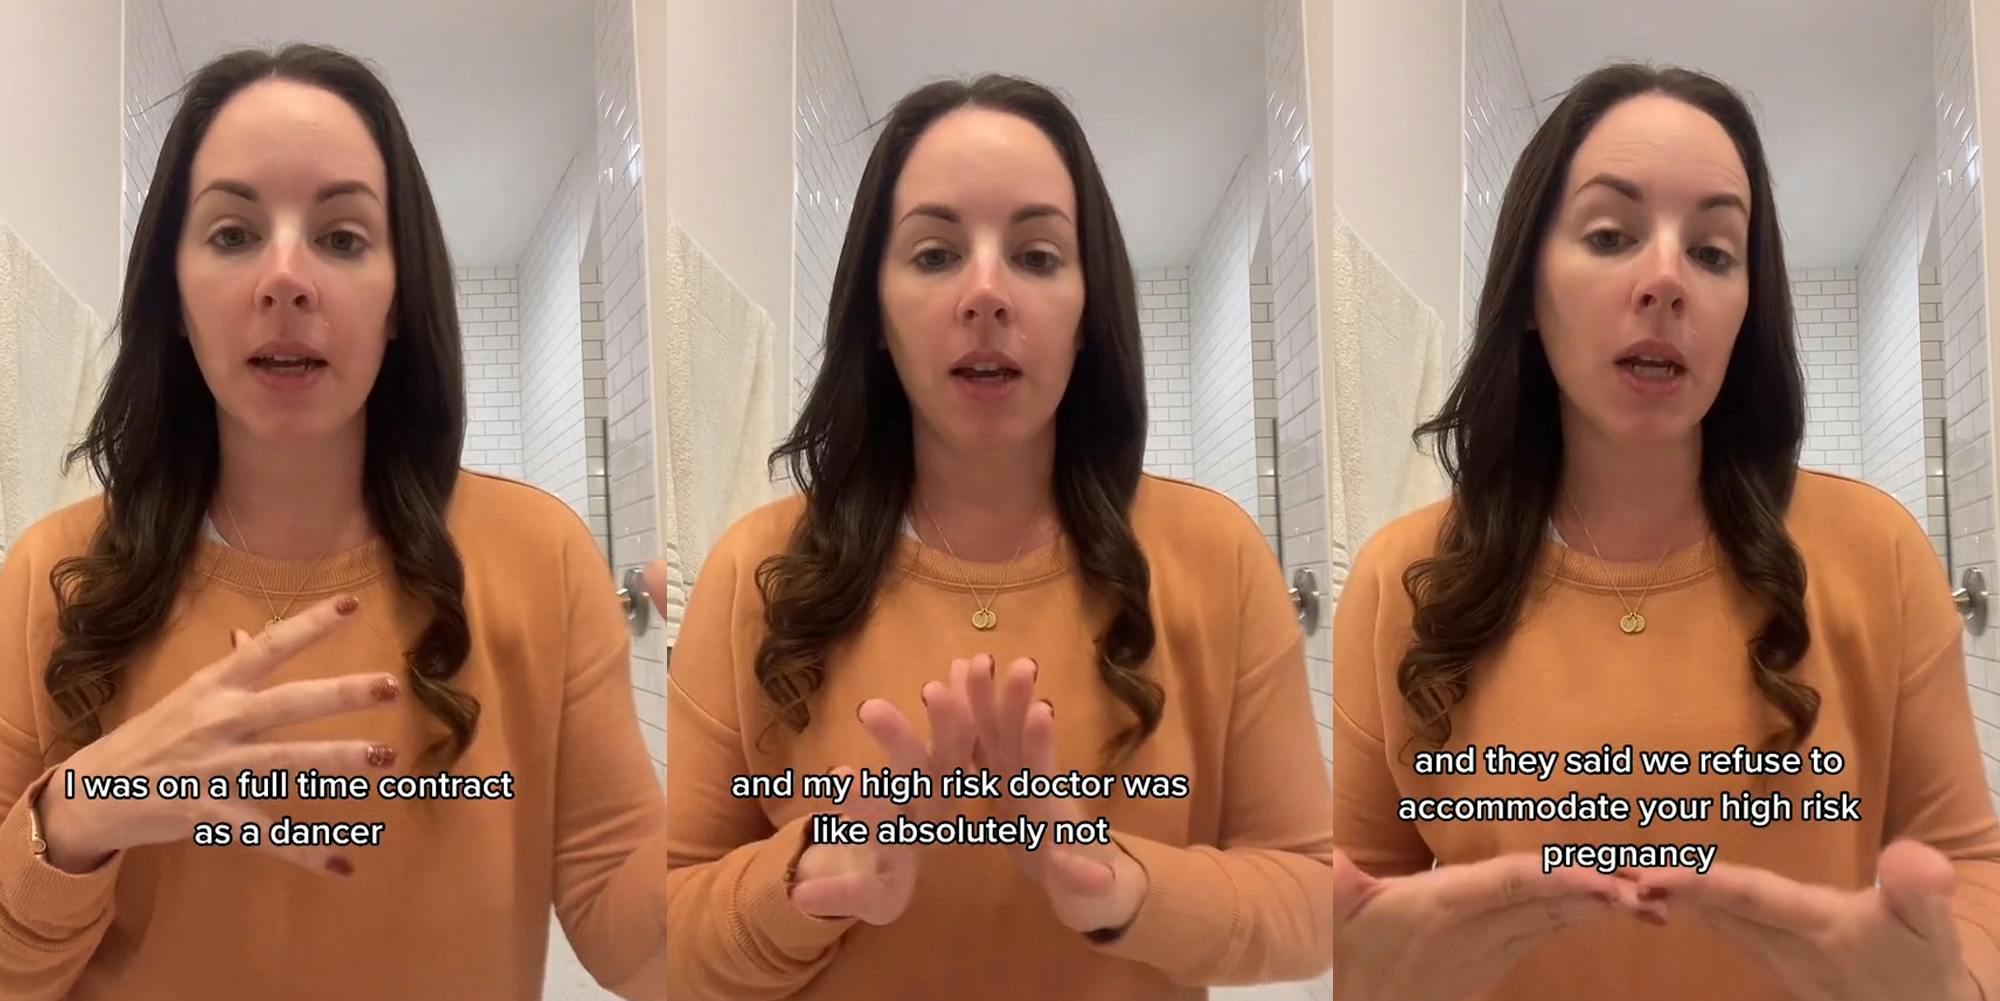 woman speaking in bathroom with hand up caption "I was on a full time contract as a dancer" (l) woman speaking in bathroom with hands out caption "and my high risk doctor was like absolutely not" (c) Woman speaking in bathroom with hands out caption "and they said we refuse to accommodate your high risk pregnancy" (r)